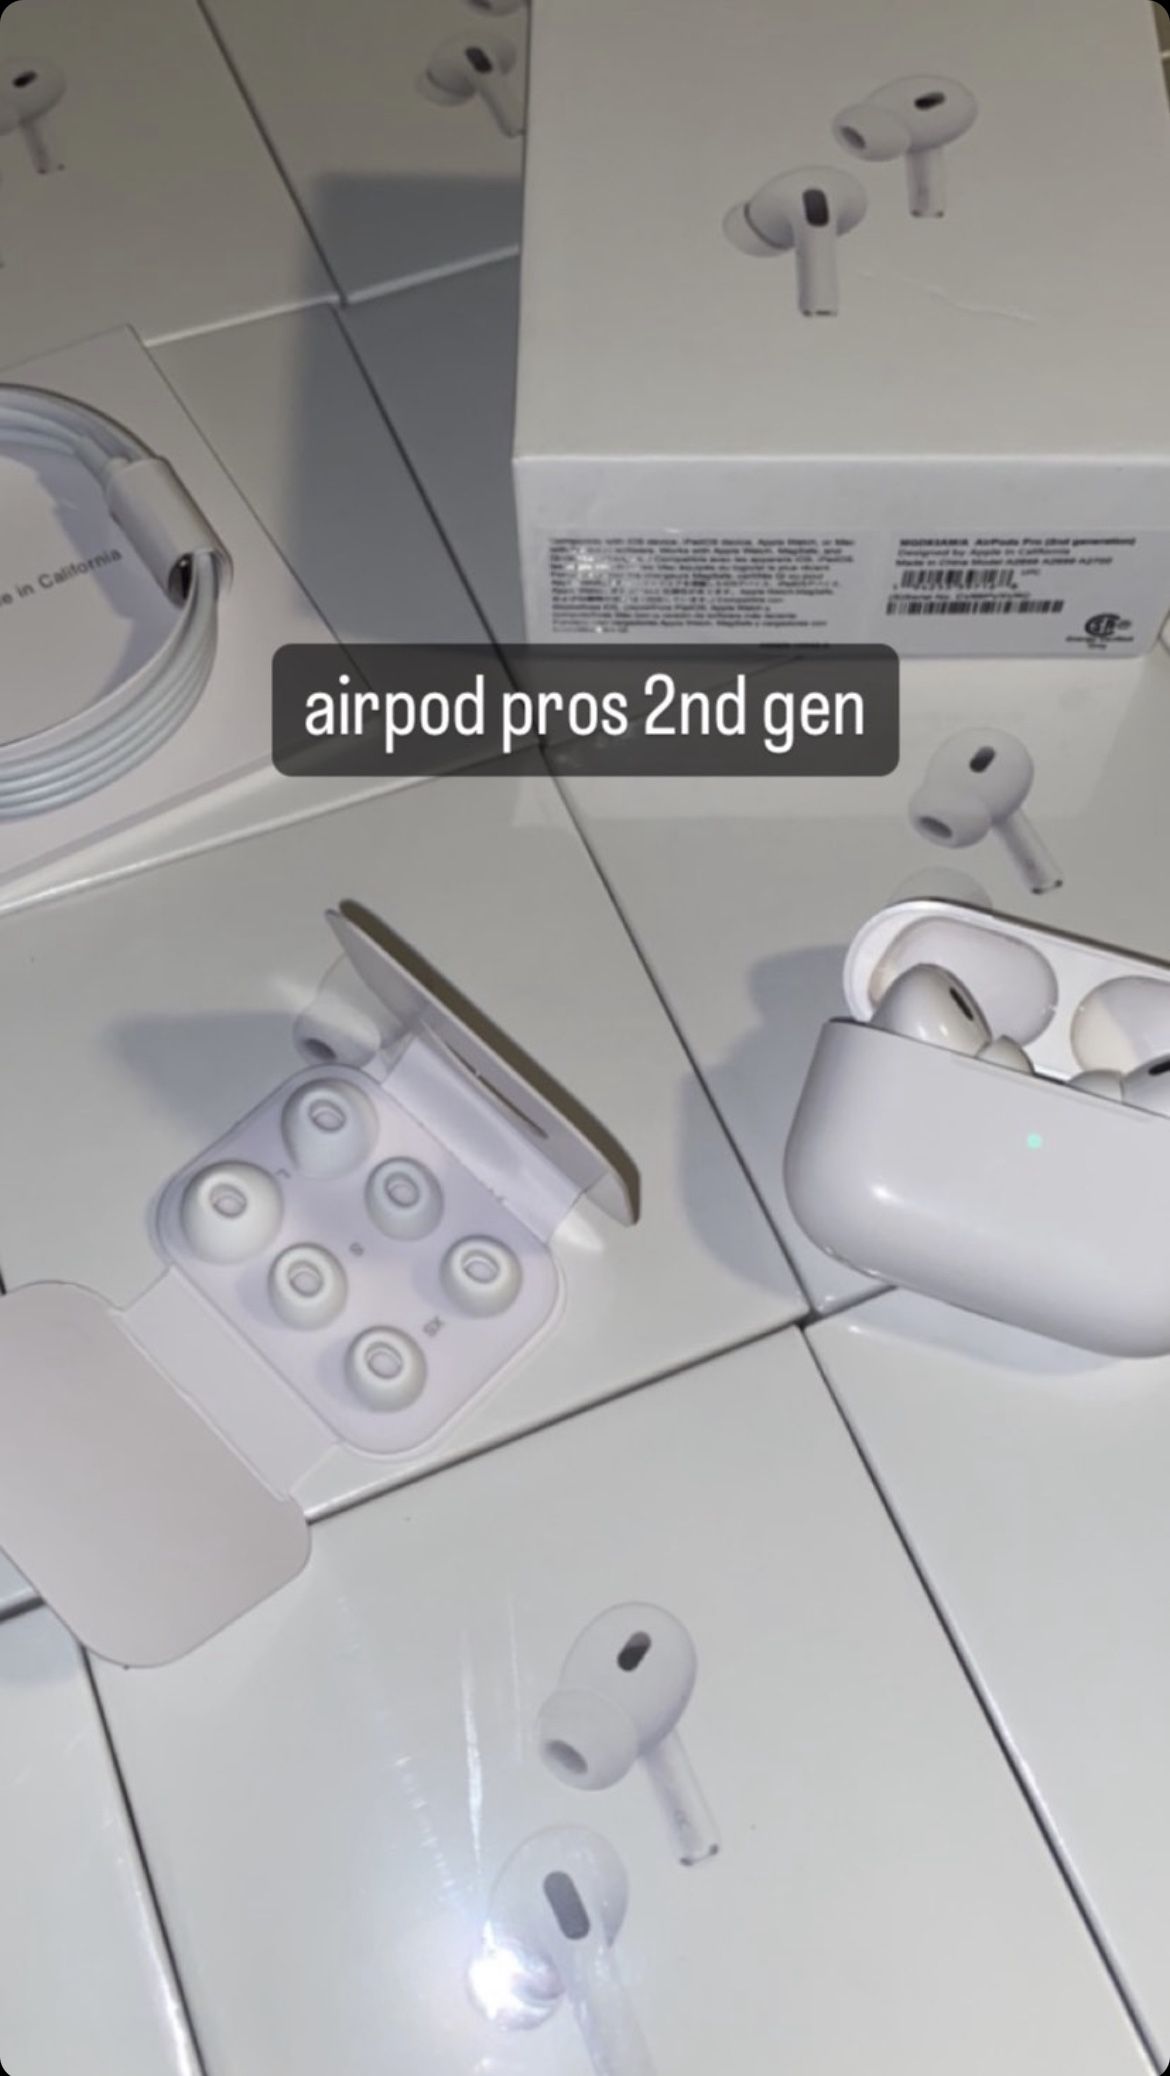 *BEST OFFER* AirPod pros 2nd Generation